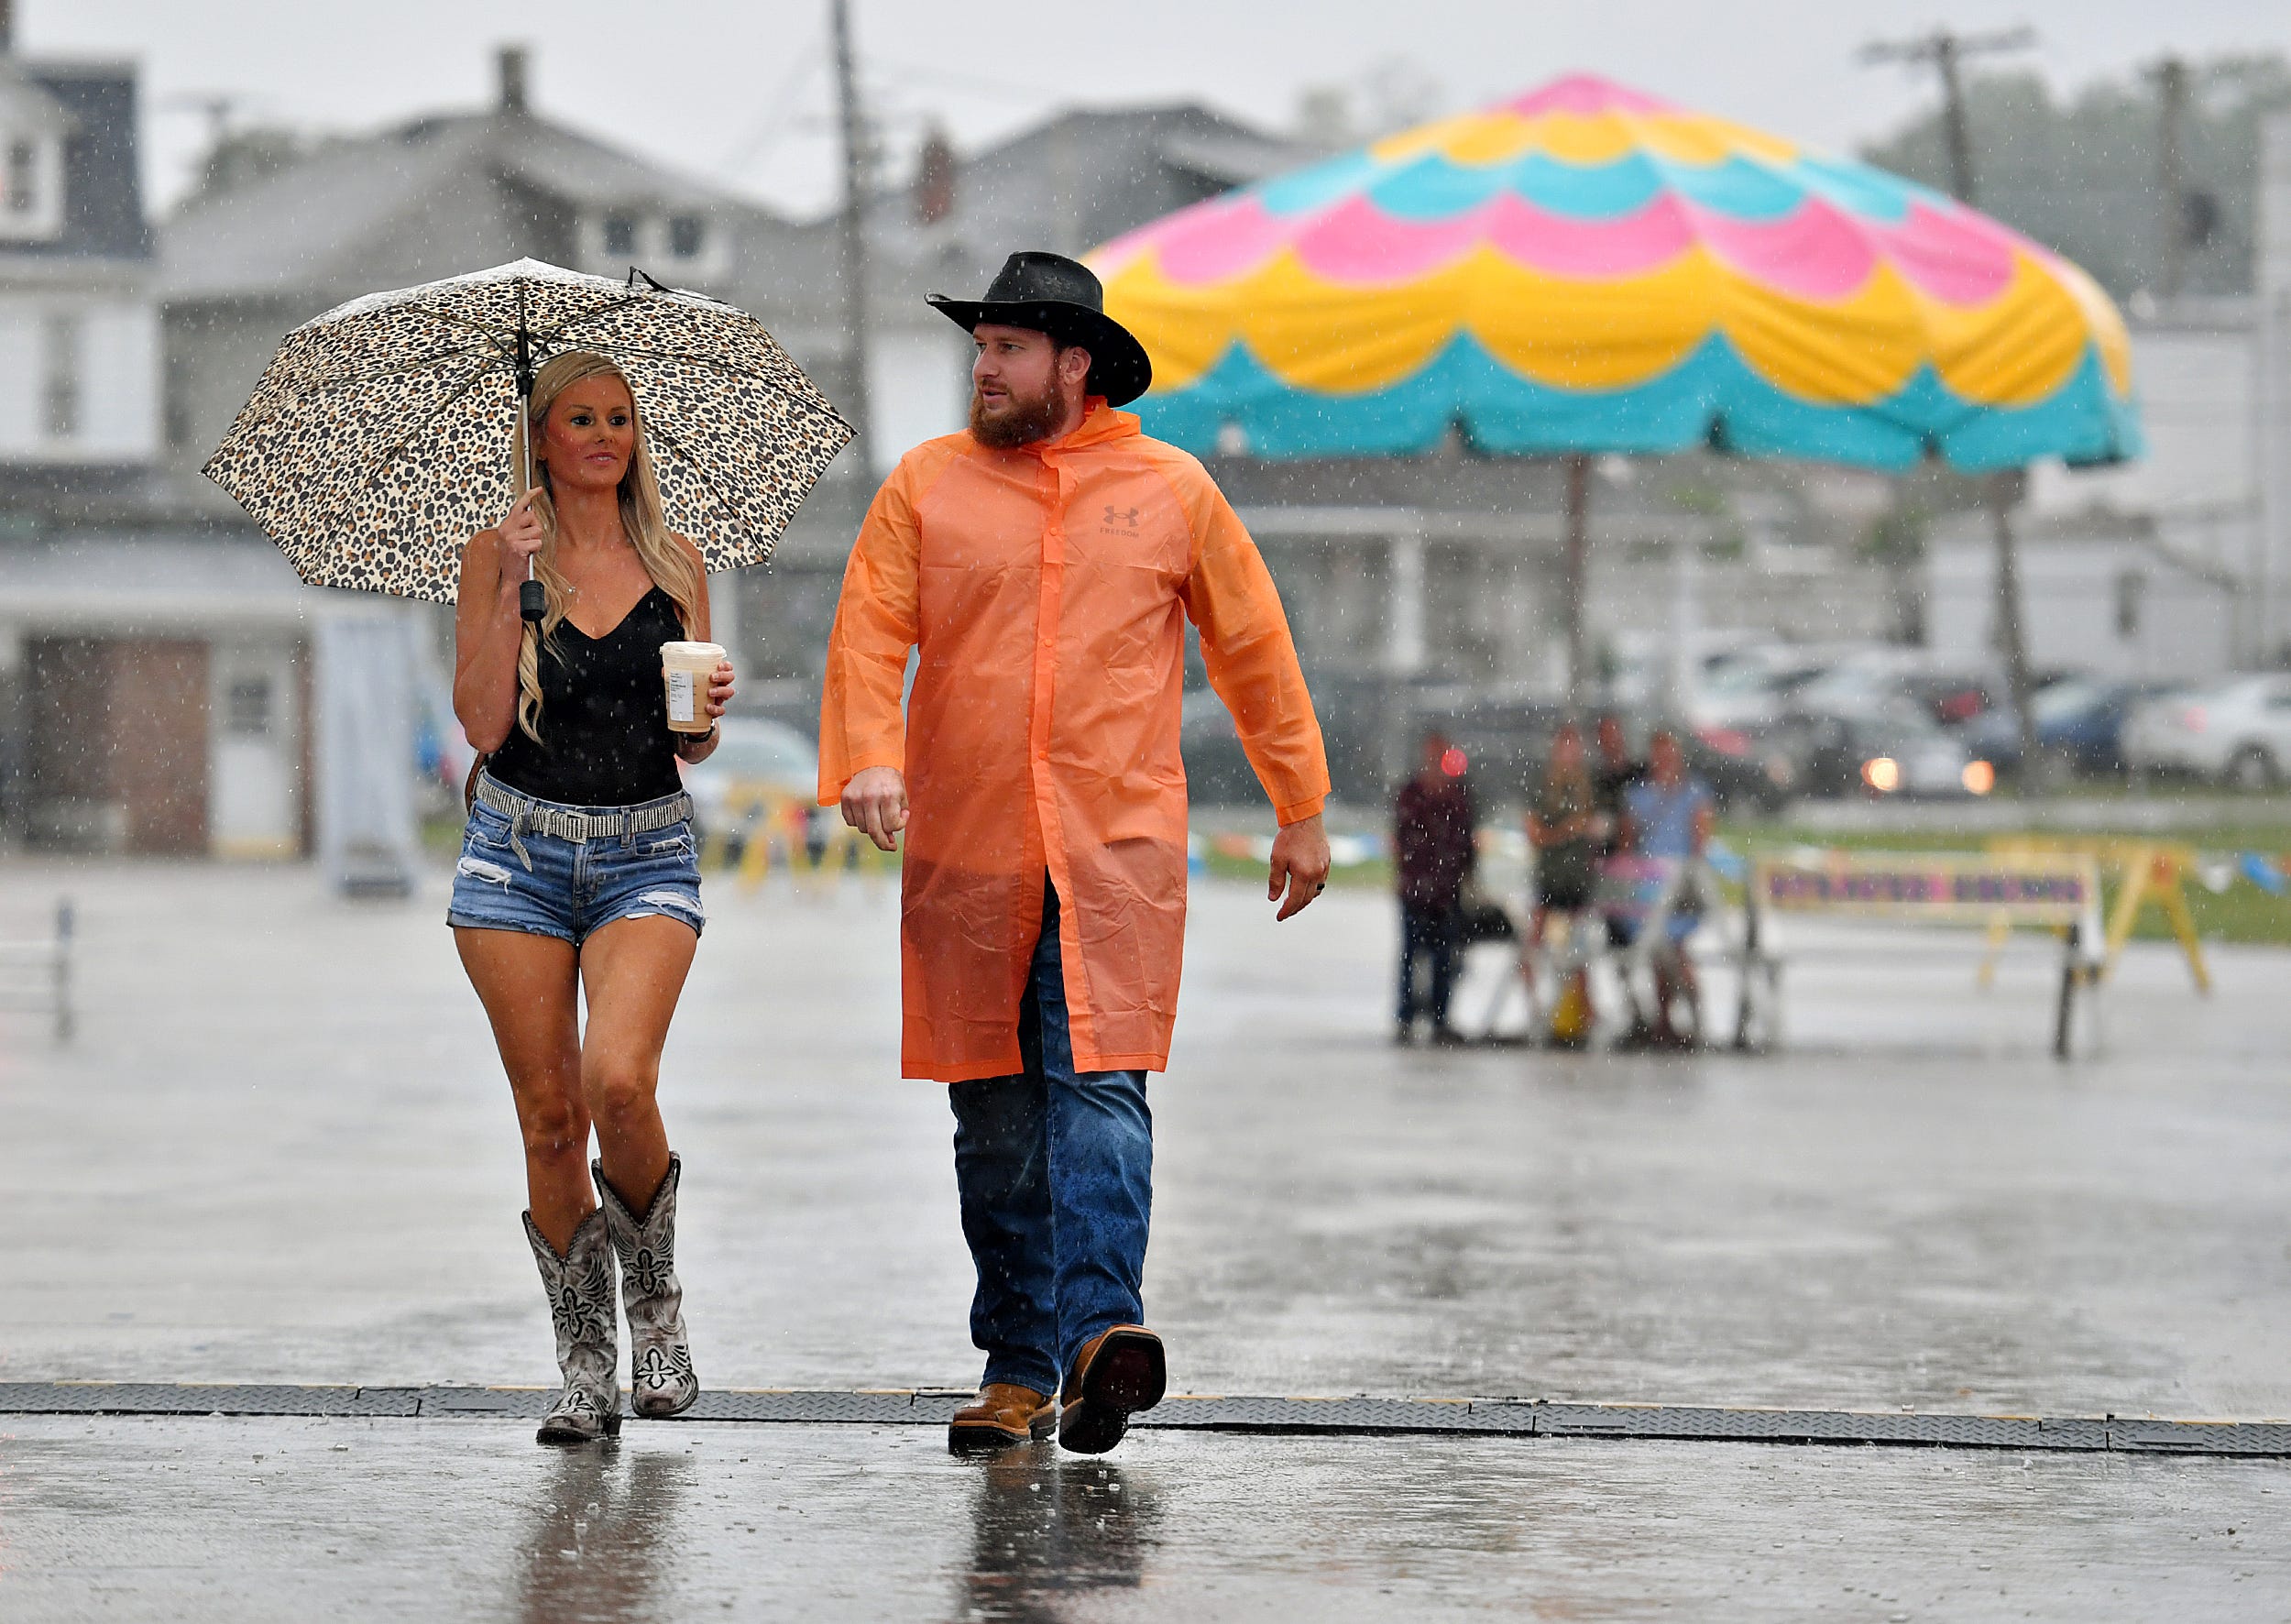 Sarah and Mike Brubaker, from McAlisterville in Juniata County, brave the rain to see Jason Aldean perform during the final day of York State Fair in York, Pa., Sunday, July 31, 2022. Dawn J. Sagert/The York Dispatch